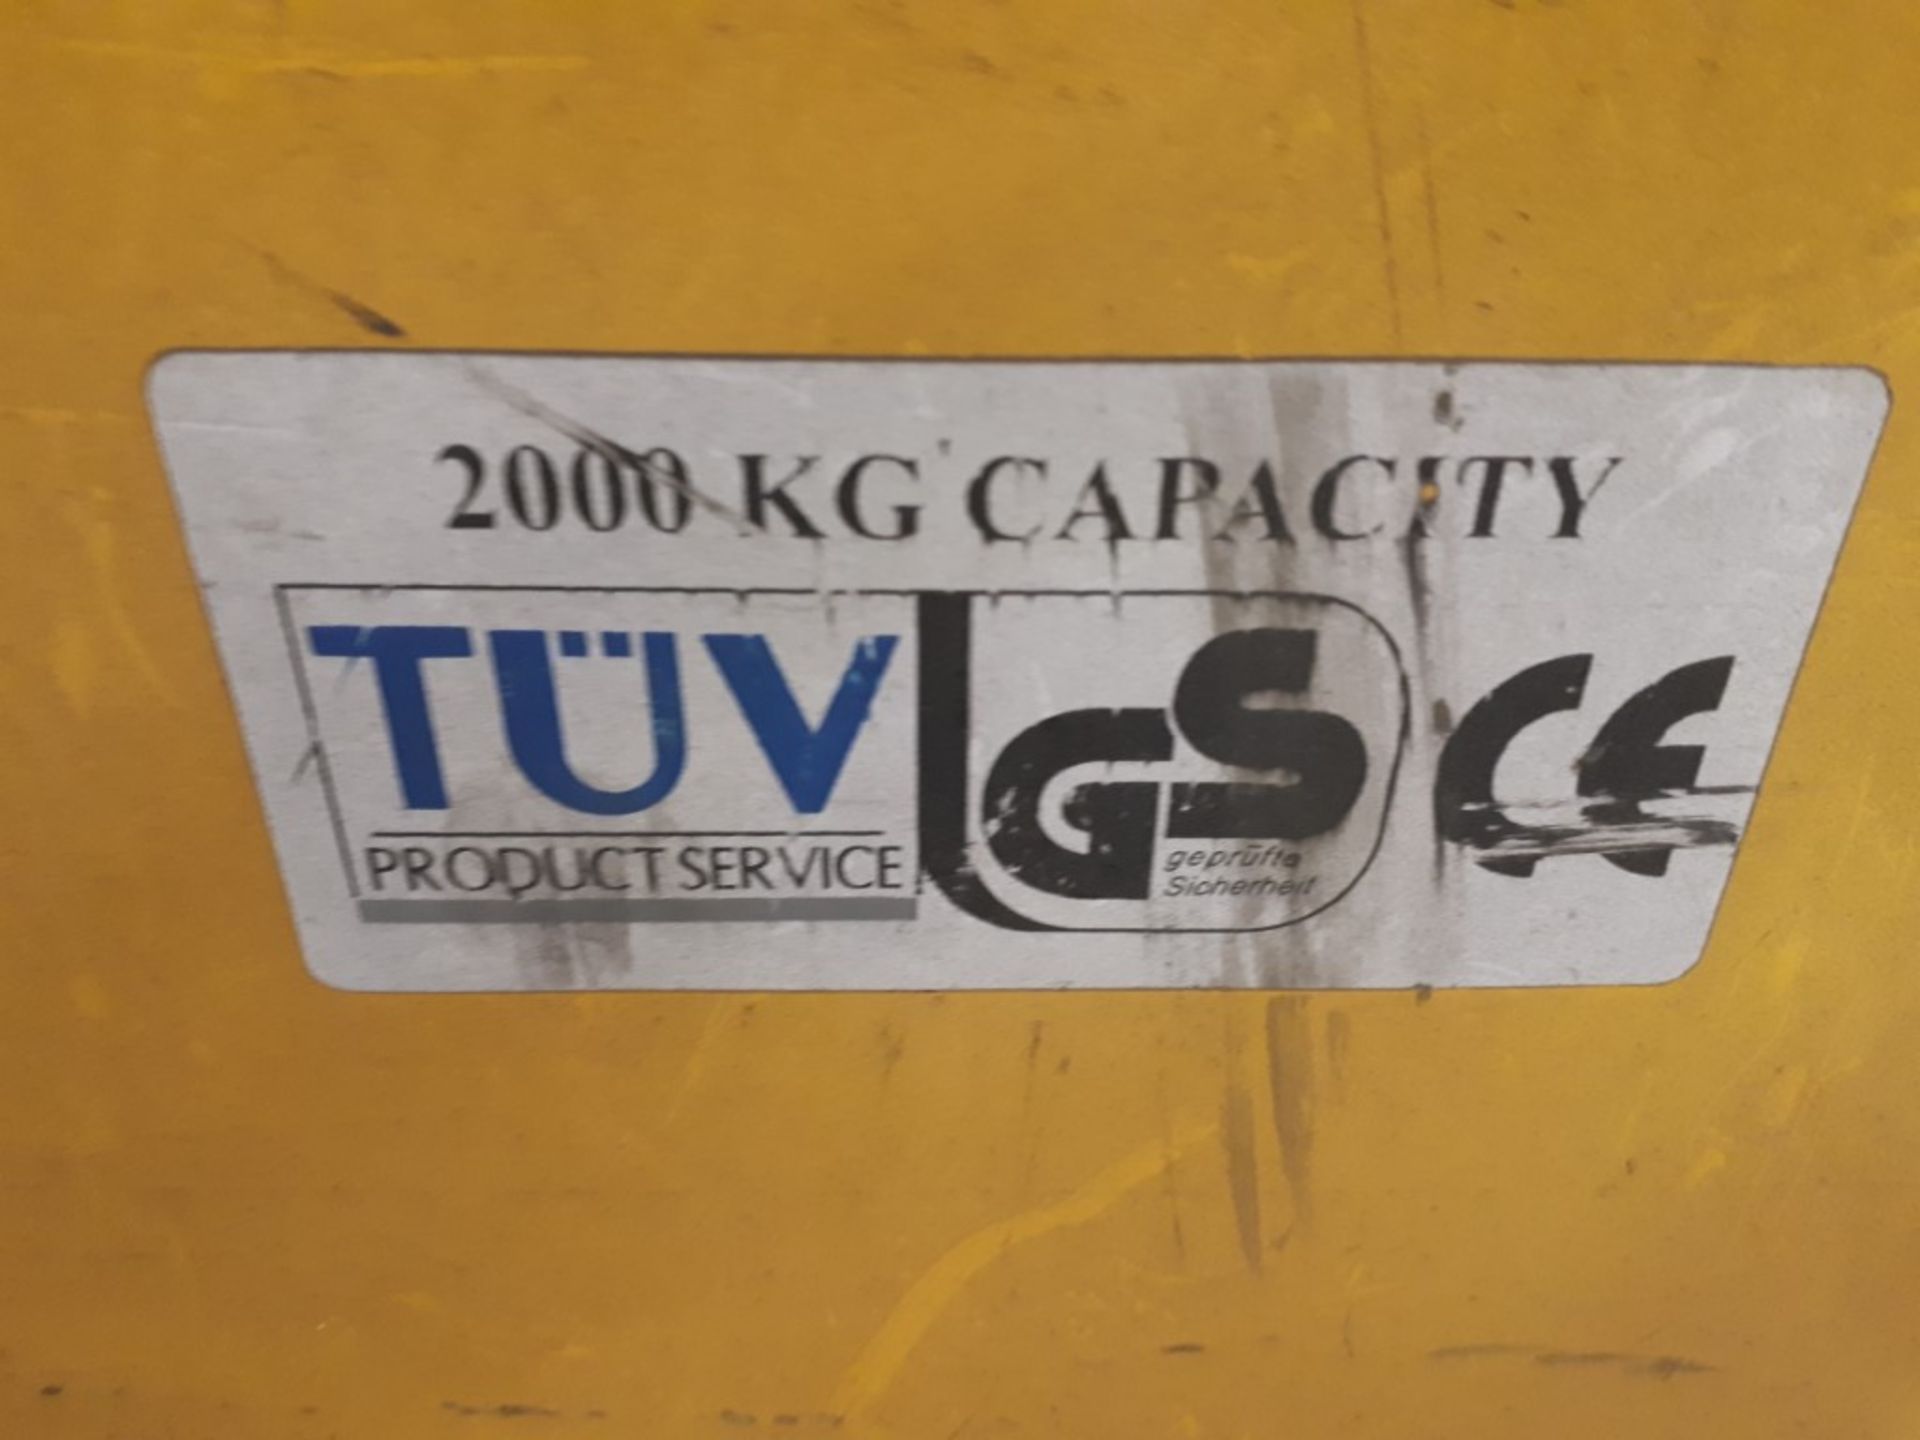 TUV GS 2,000 kg pallet truck with pallet scale - Image 4 of 5